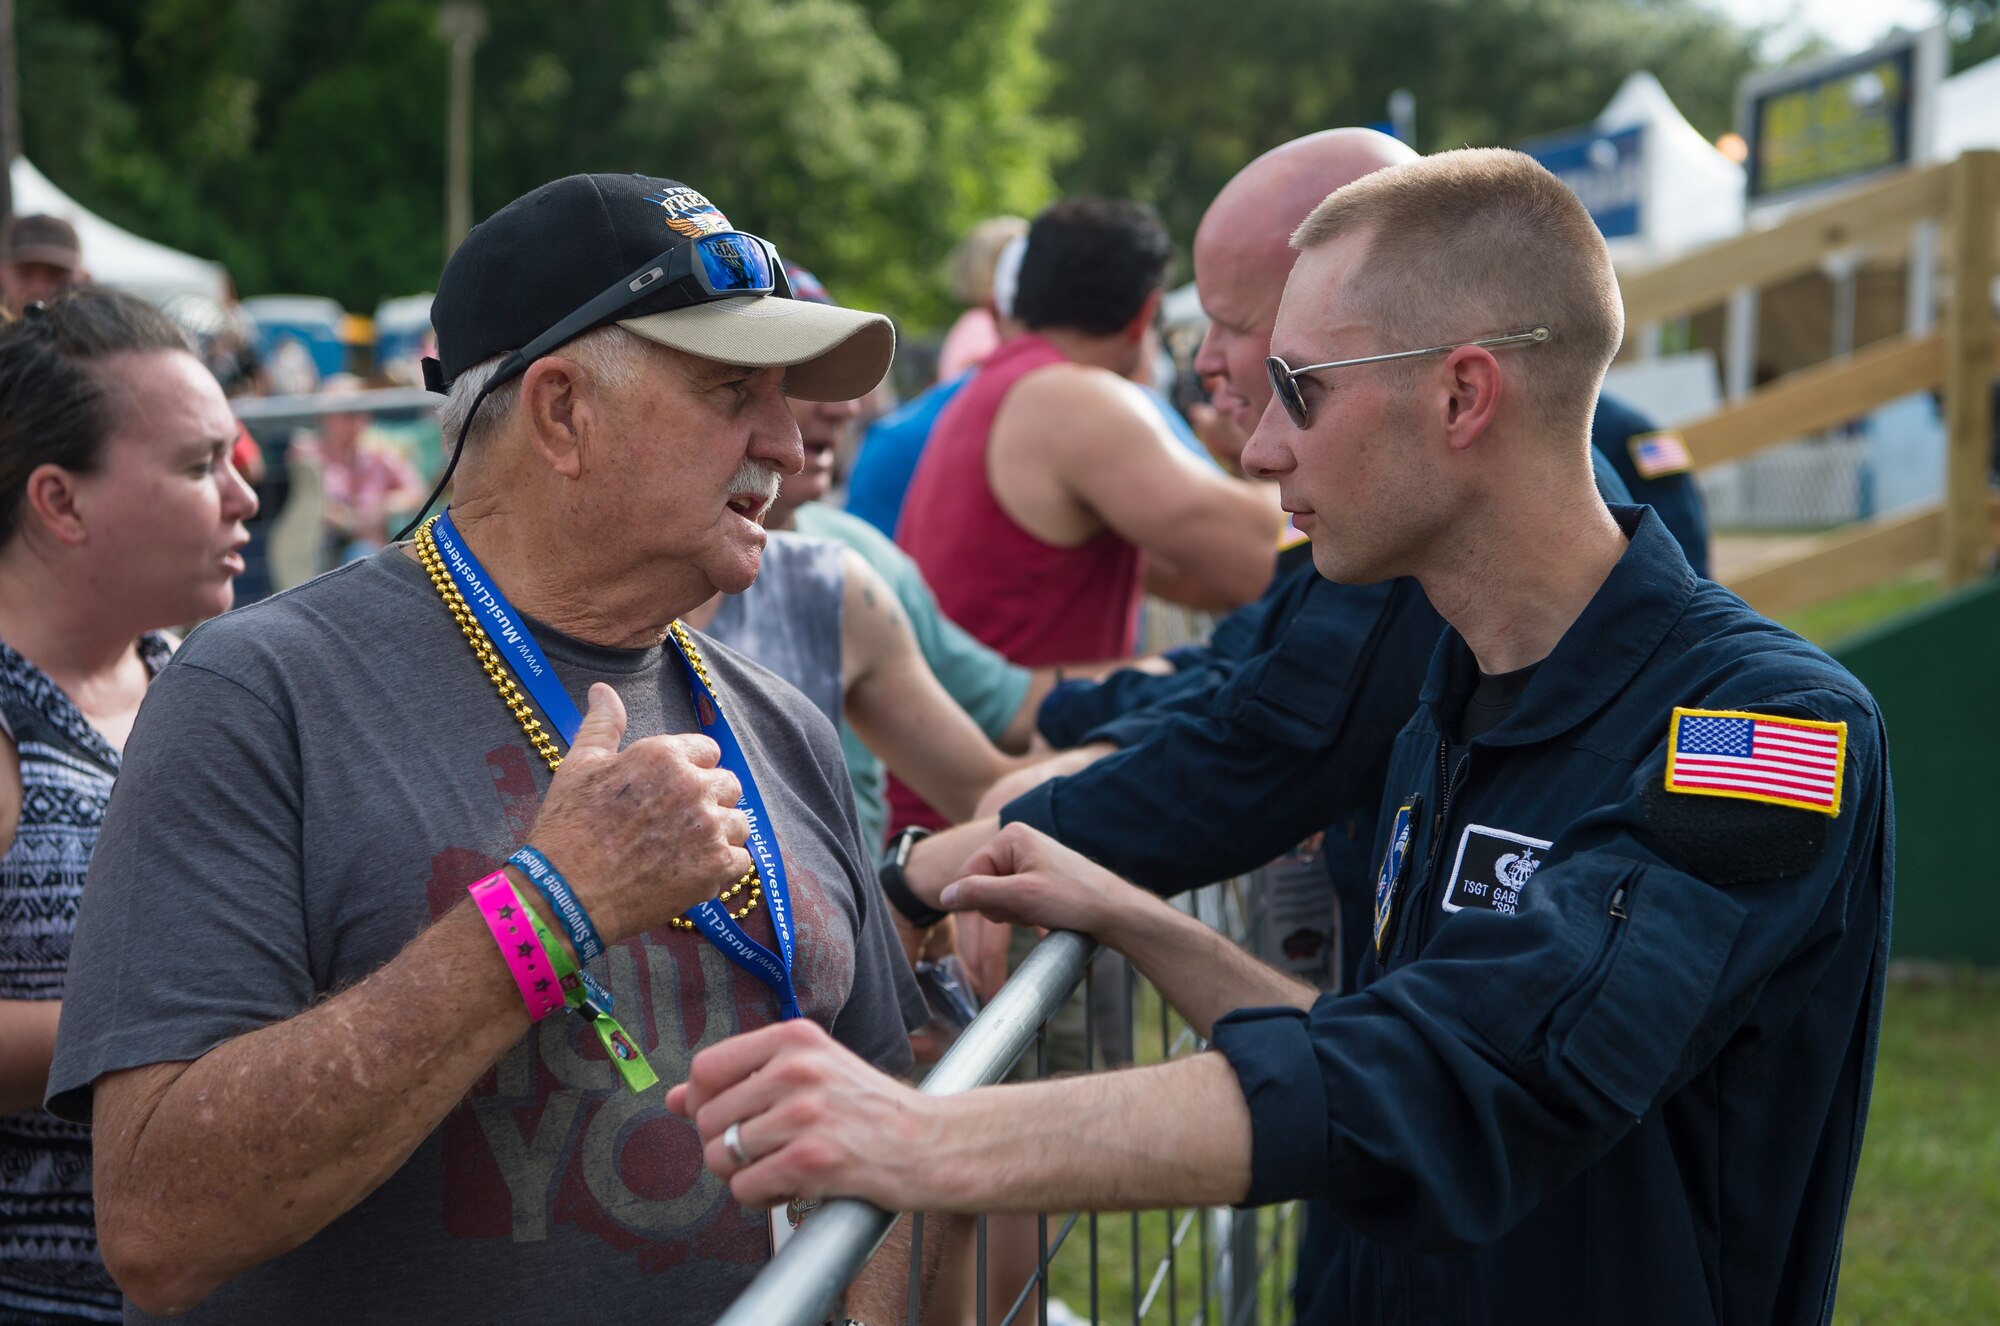 Technical Sgt. Gabriel Staznik, drummer with Max Impact, visits with fans after performing at the Armed Forces Tribute for the 2019 Suwannee River Jam. This event took place at the Spirit of the Suwannee Music Park on Saturday, May 4, 2019. (U.S. Air Force Photo by Chief Master Sgt. Kevin Burns)